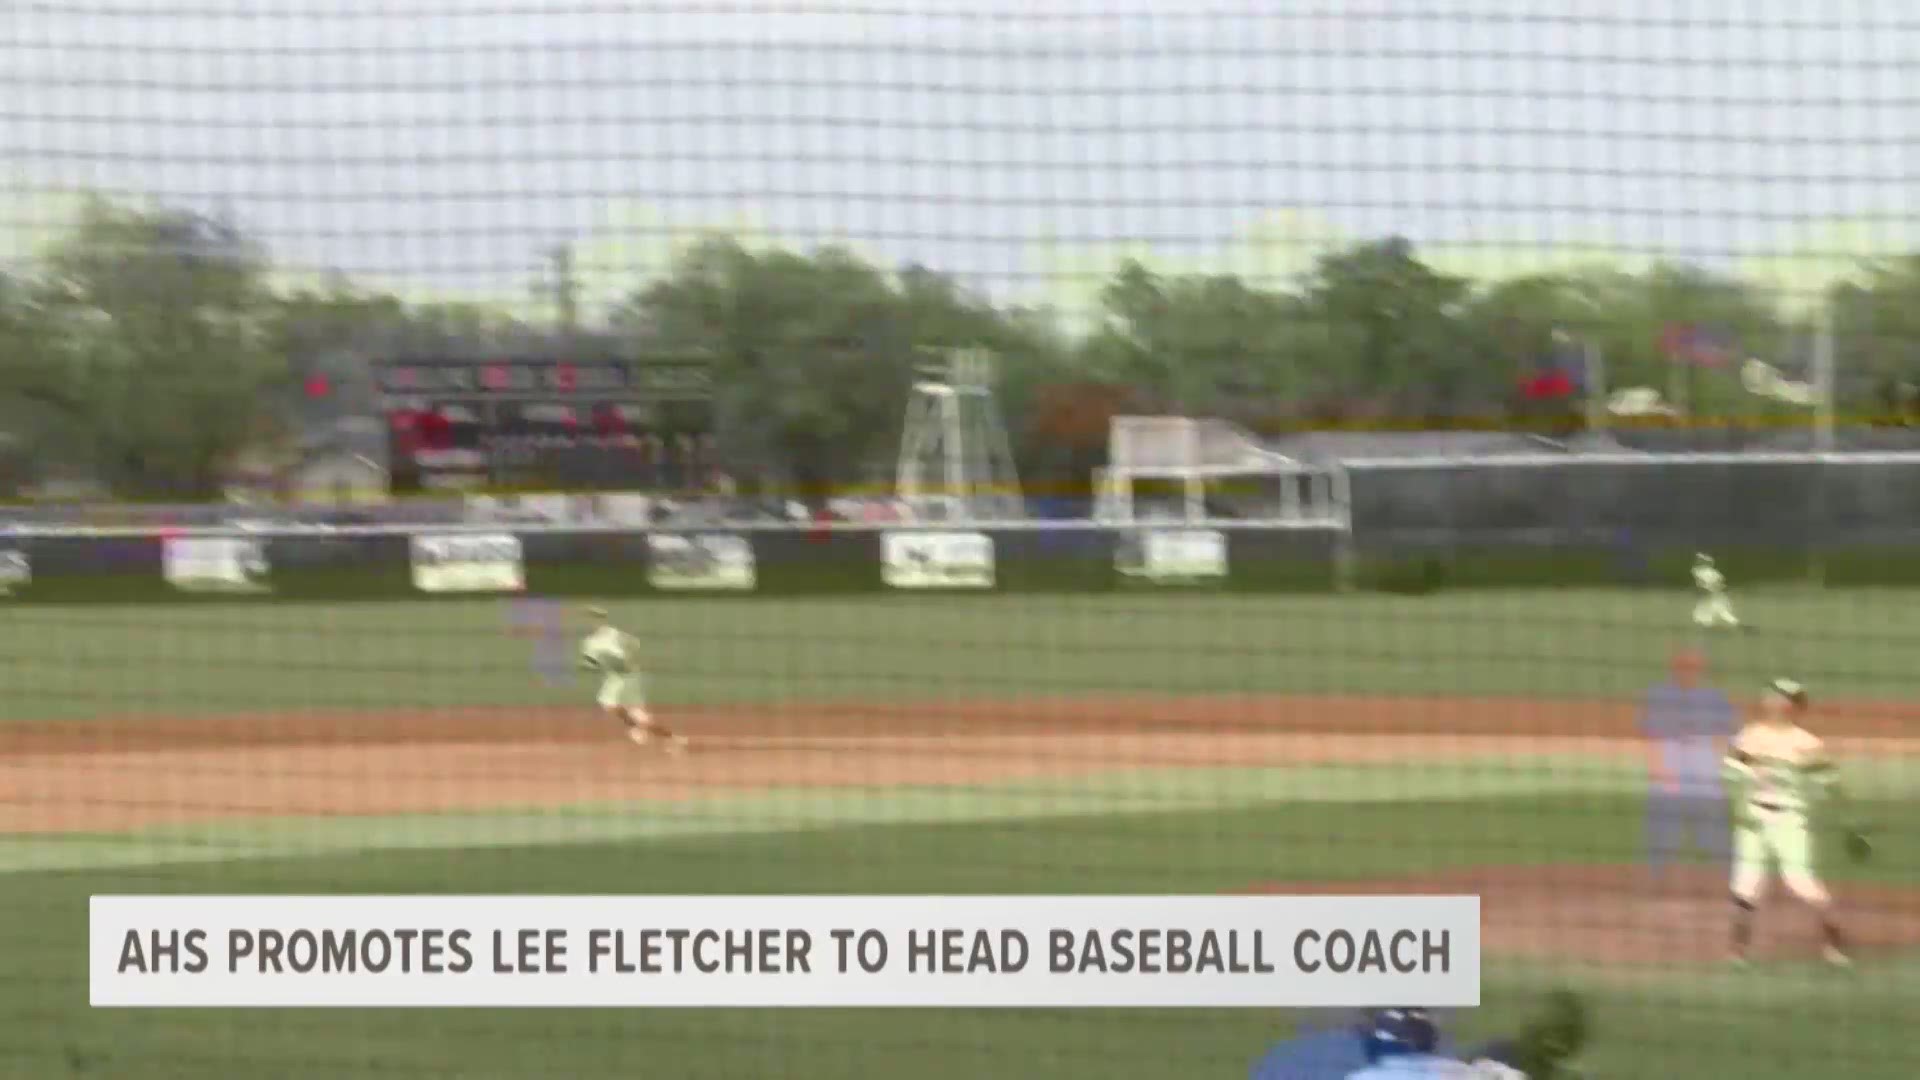 Fletcher has been an assistant coach at AHS for the past five years.